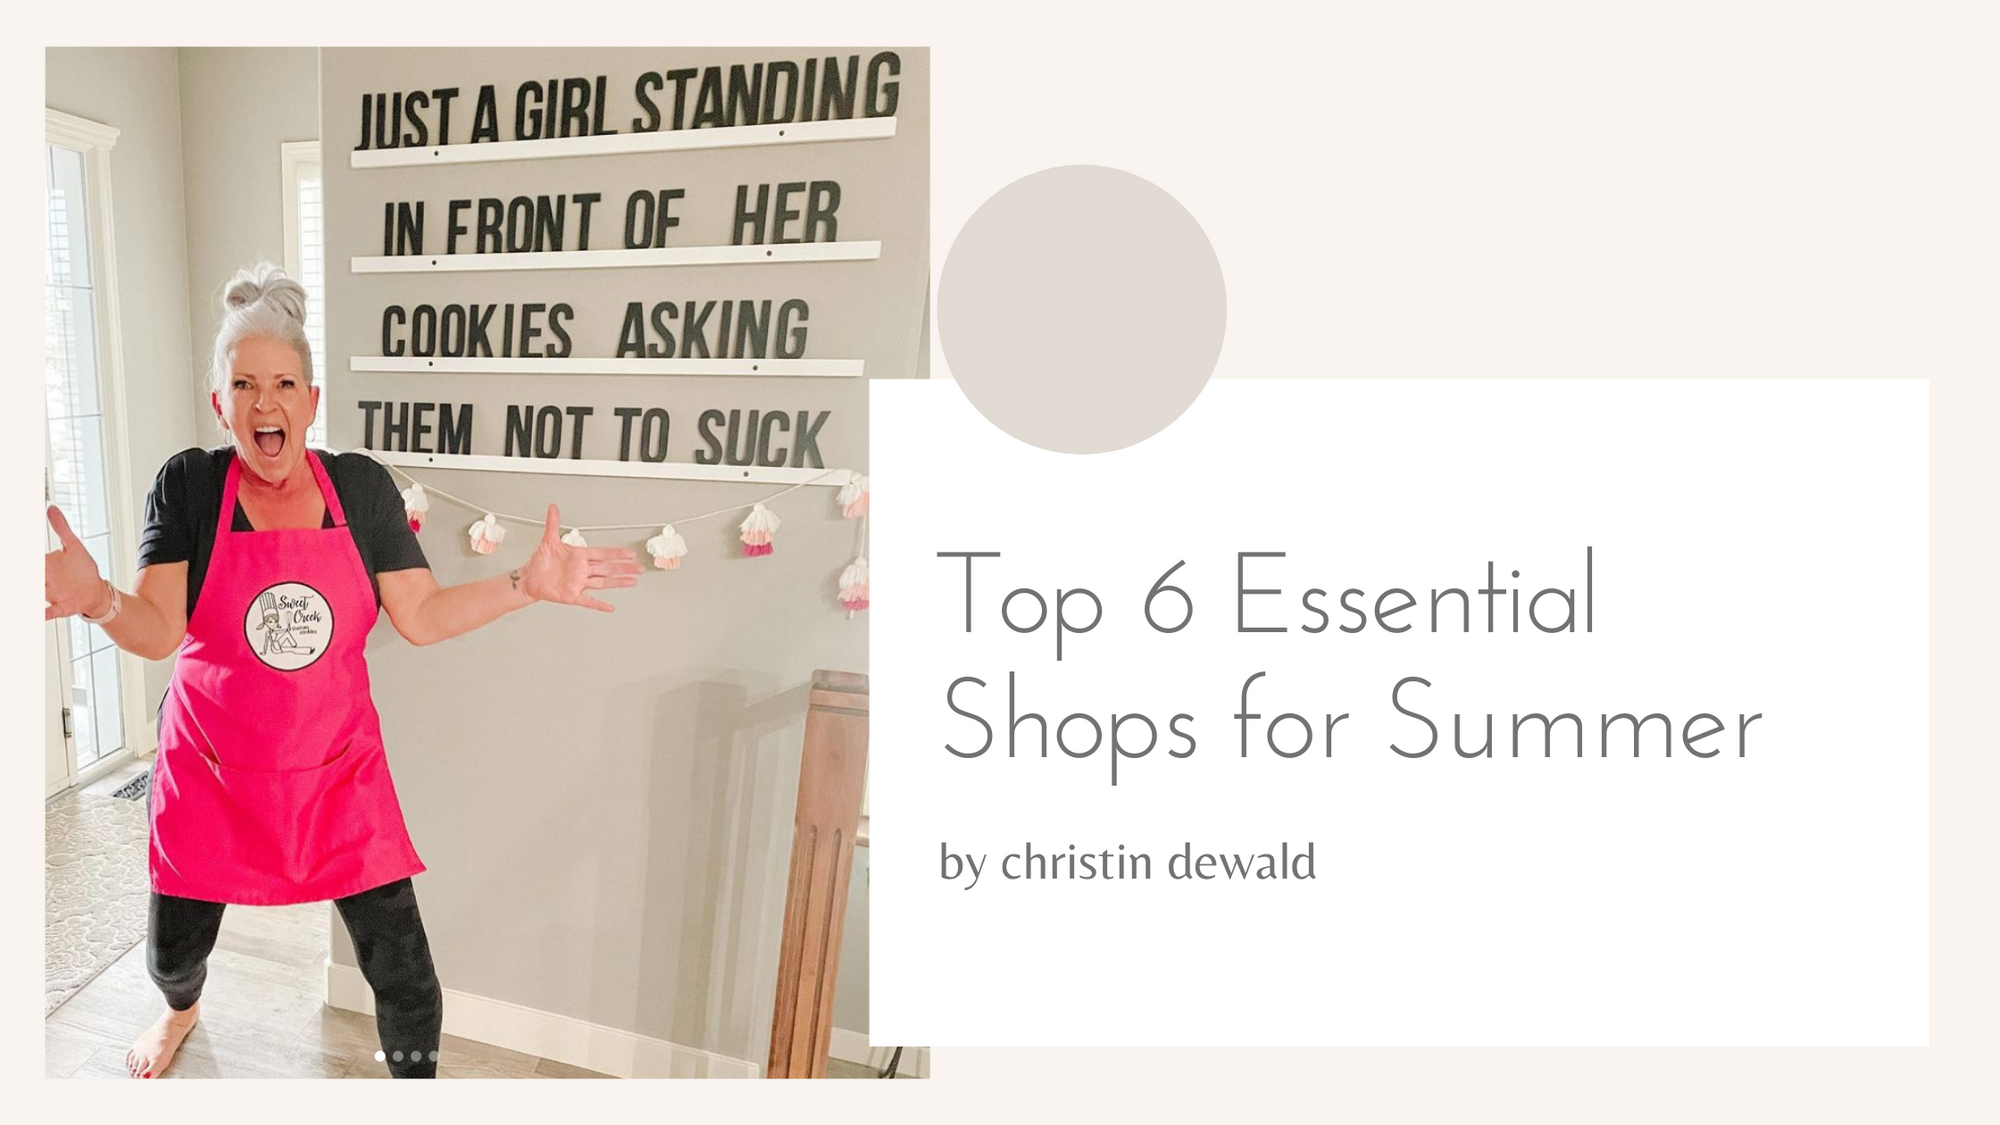 Christin’s Top 6 Essential Shops for Summer